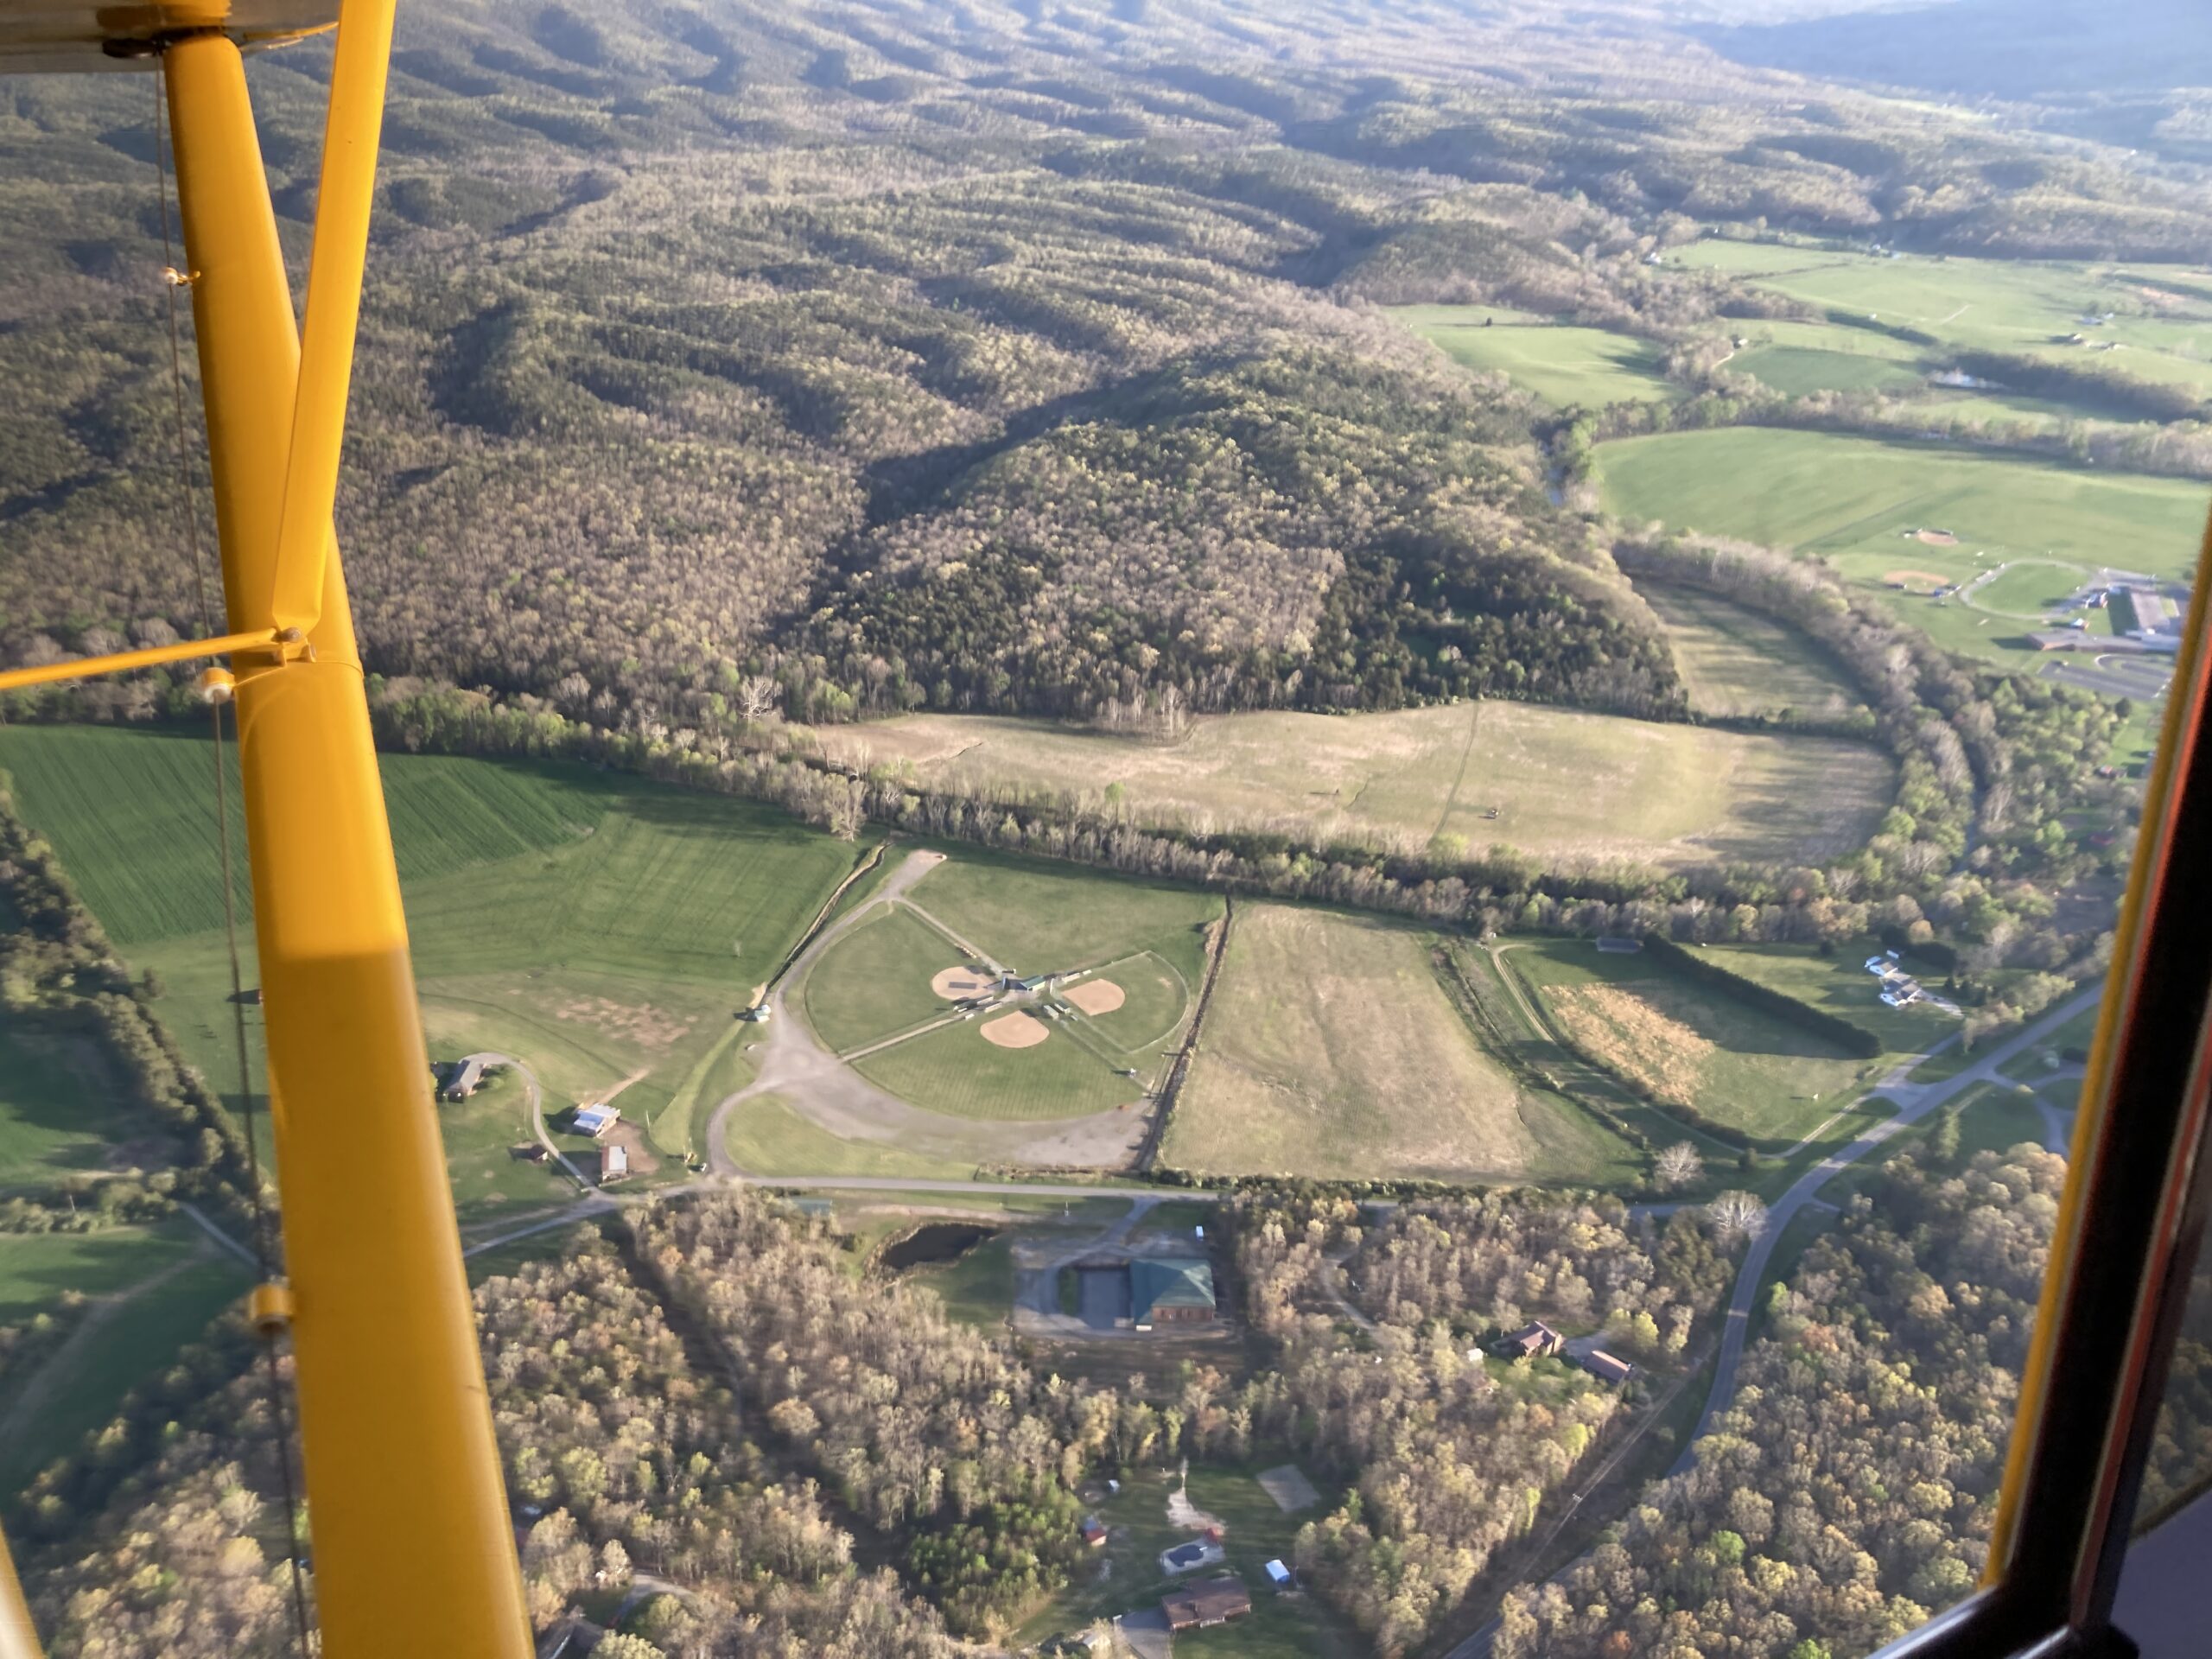 15 years in the making, Craig County's "Field of Dreams" gives kids a place to play at the edge of the Jefferson National Forest.